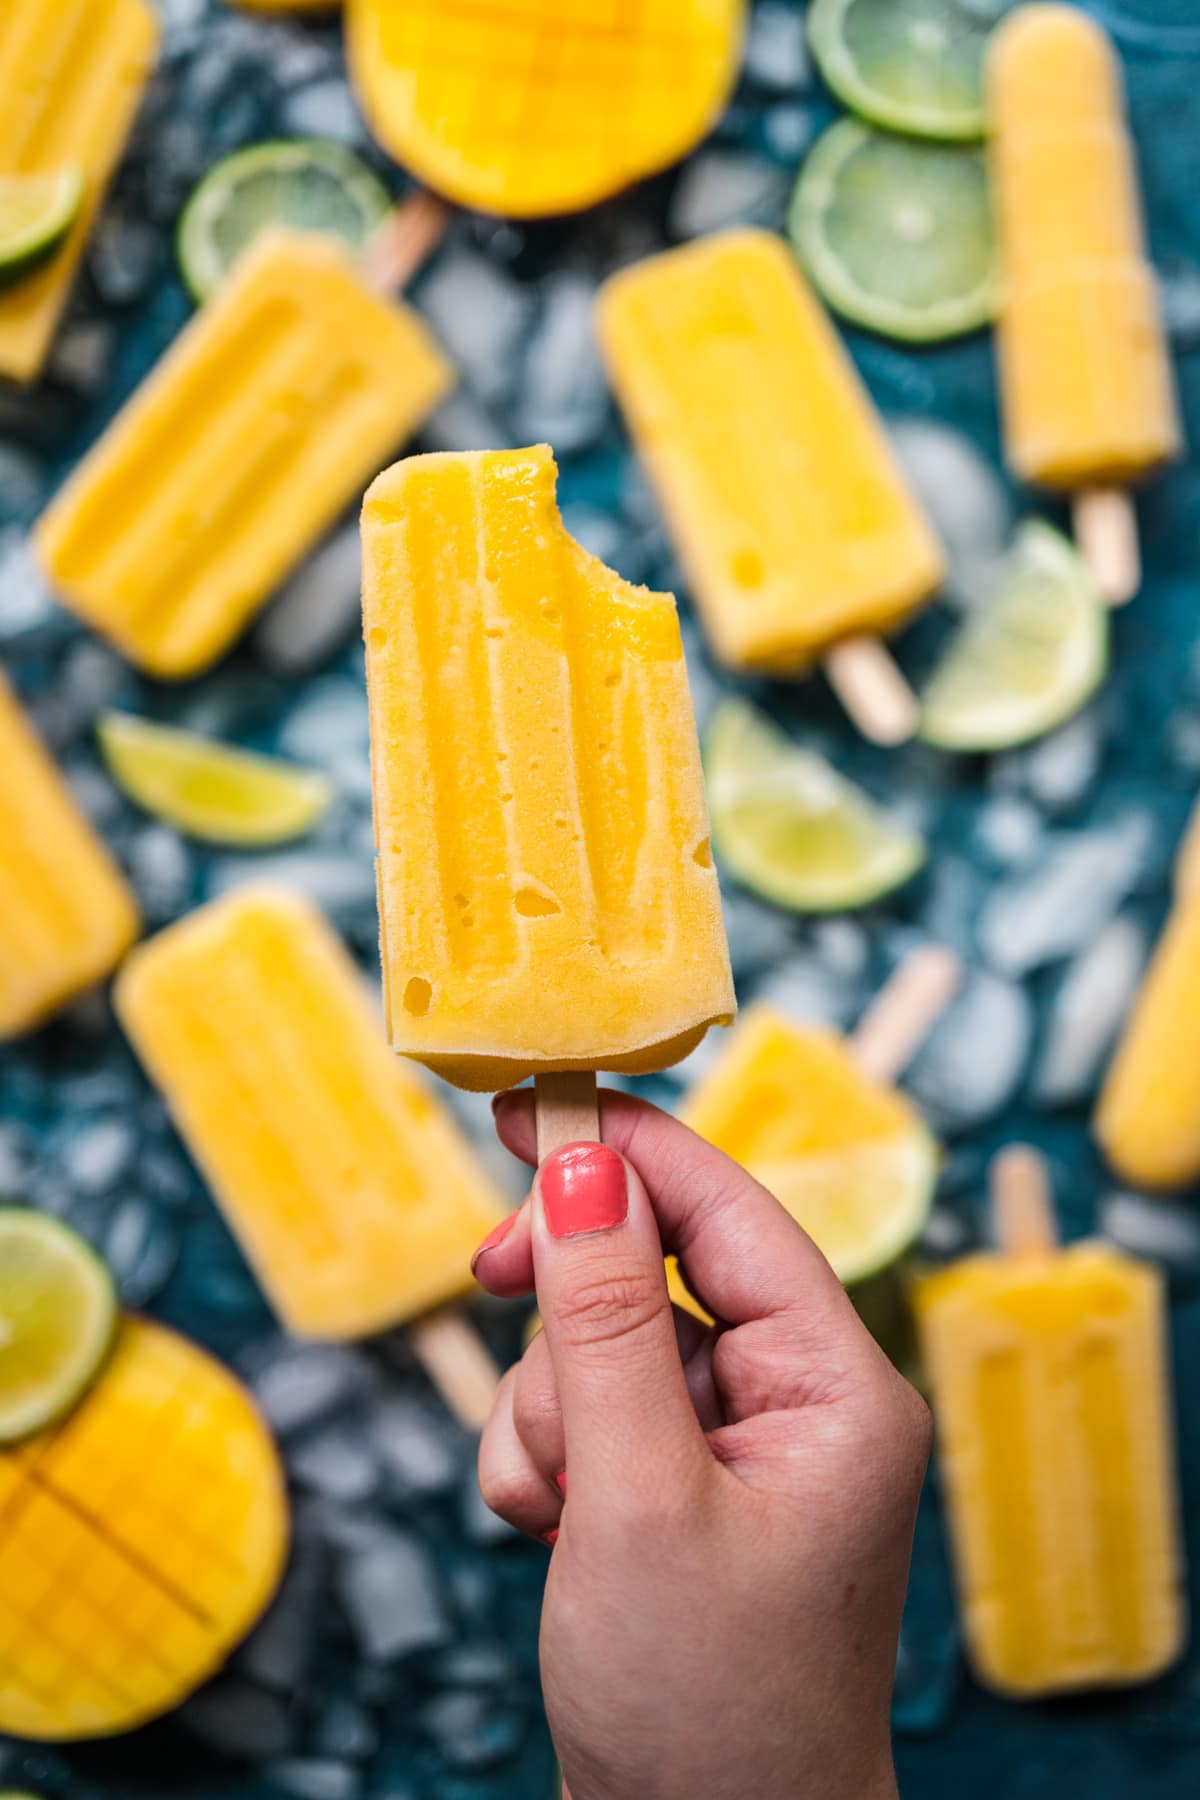 Close up view of mango popsicle with a bite taken out.